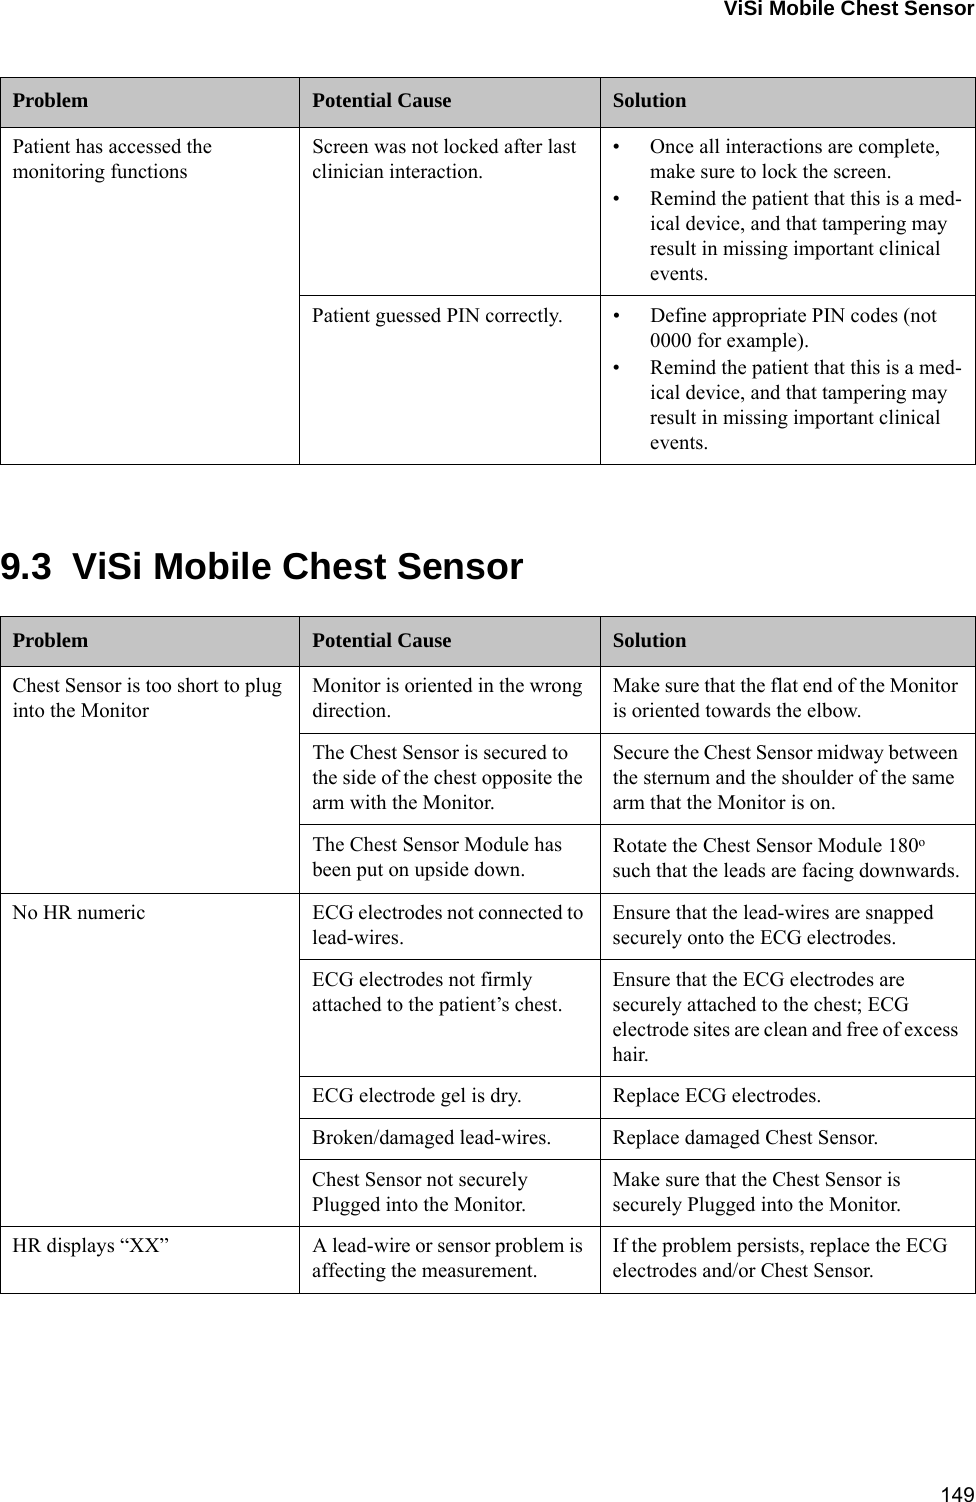 ViSi Mobile Chest Sensor1499.3  ViSi Mobile Chest SensorPatient has accessed the monitoring functionsScreen was not locked after last clinician interaction.• Once all interactions are complete, make sure to lock the screen.• Remind the patient that this is a med-ical device, and that tampering may result in missing important clinical events.Patient guessed PIN correctly. • Define appropriate PIN codes (not 0000 for example).• Remind the patient that this is a med-ical device, and that tampering may result in missing important clinical events.Problem Potential Cause SolutionChest Sensor is too short to plug into the MonitorMonitor is oriented in the wrong direction.Make sure that the flat end of the Monitor is oriented towards the elbow.The Chest Sensor is secured to the side of the chest opposite the arm with the Monitor.Secure the Chest Sensor midway between the sternum and the shoulder of the same arm that the Monitor is on.The Chest Sensor Module has been put on upside down.Rotate the Chest Sensor Module 180o such that the leads are facing downwards.No HR numeric ECG electrodes not connected to lead-wires.Ensure that the lead-wires are snapped securely onto the ECG electrodes.ECG electrodes not firmly attached to the patient’s chest.Ensure that the ECG electrodes are securely attached to the chest; ECG electrode sites are clean and free of excess hair.ECG electrode gel is dry. Replace ECG electrodes.Broken/damaged lead-wires. Replace damaged Chest Sensor.Chest Sensor not securely Plugged into the Monitor.Make sure that the Chest Sensor is securely Plugged into the Monitor.HR displays “XX” A lead-wire or sensor problem is affecting the measurement.If the problem persists, replace the ECG electrodes and/or Chest Sensor.Problem Potential Cause Solution